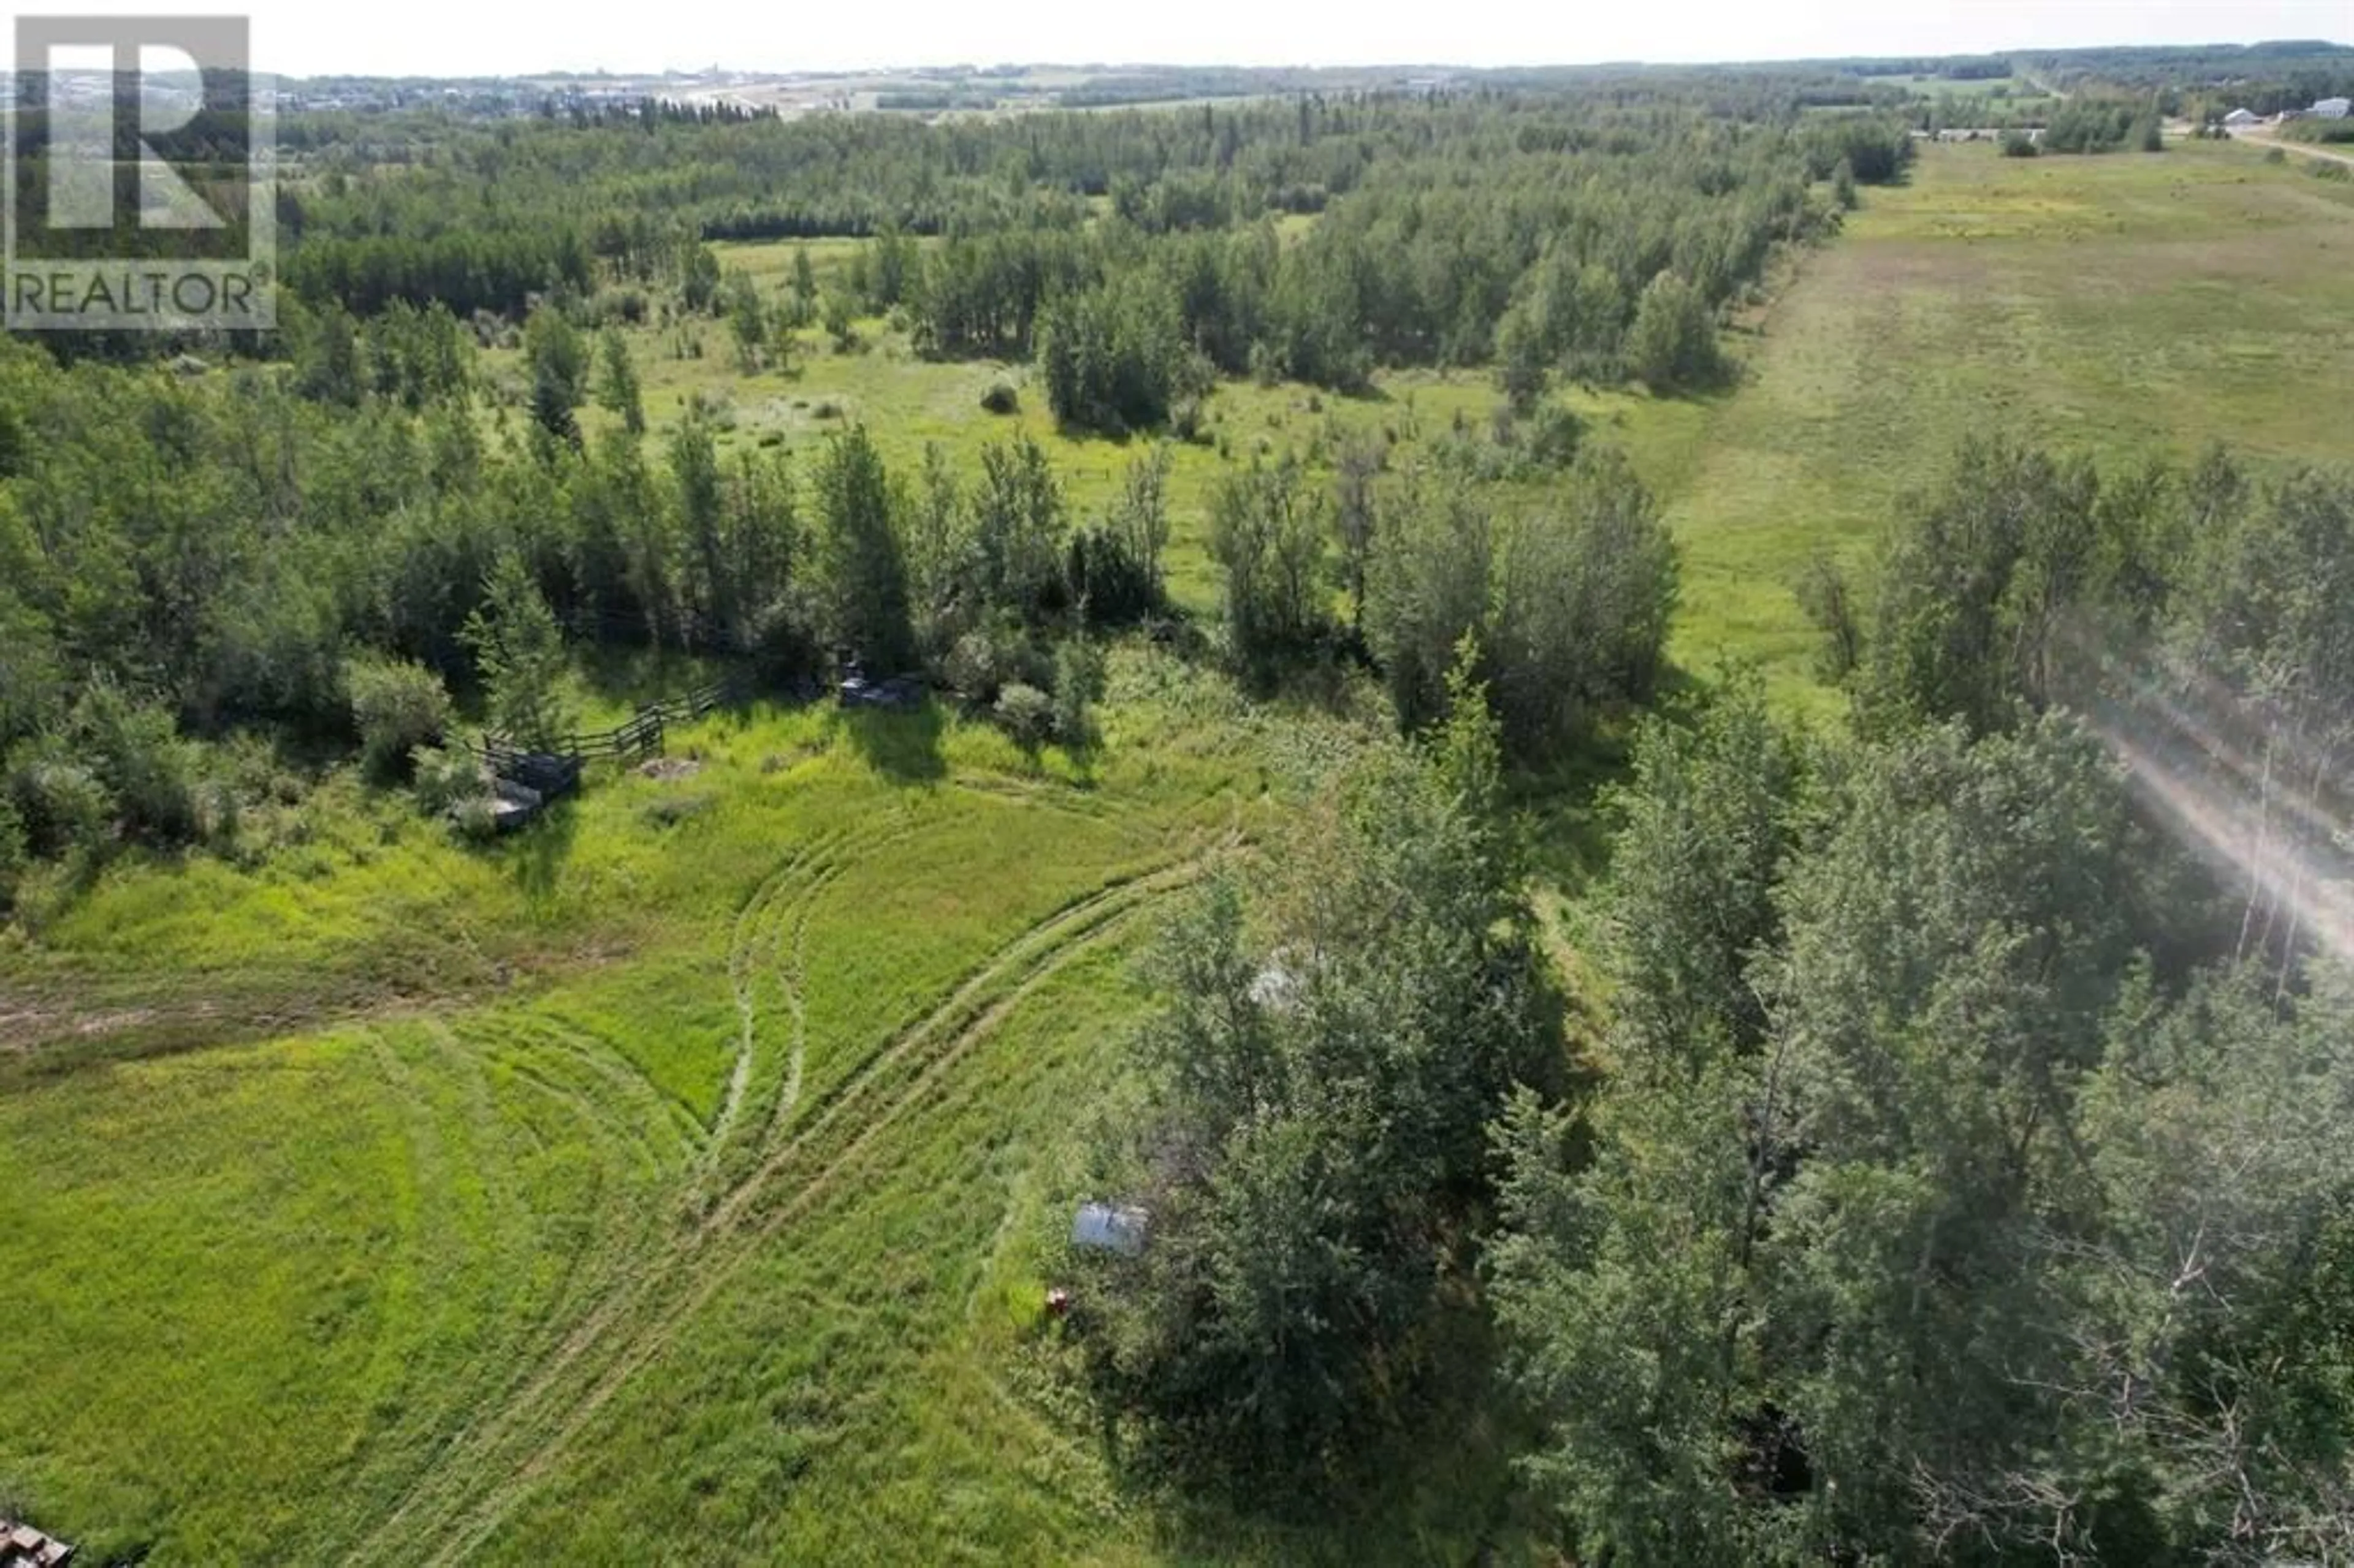 Forest view for 70345 224 Range, Valleyview Alberta T0H3N0